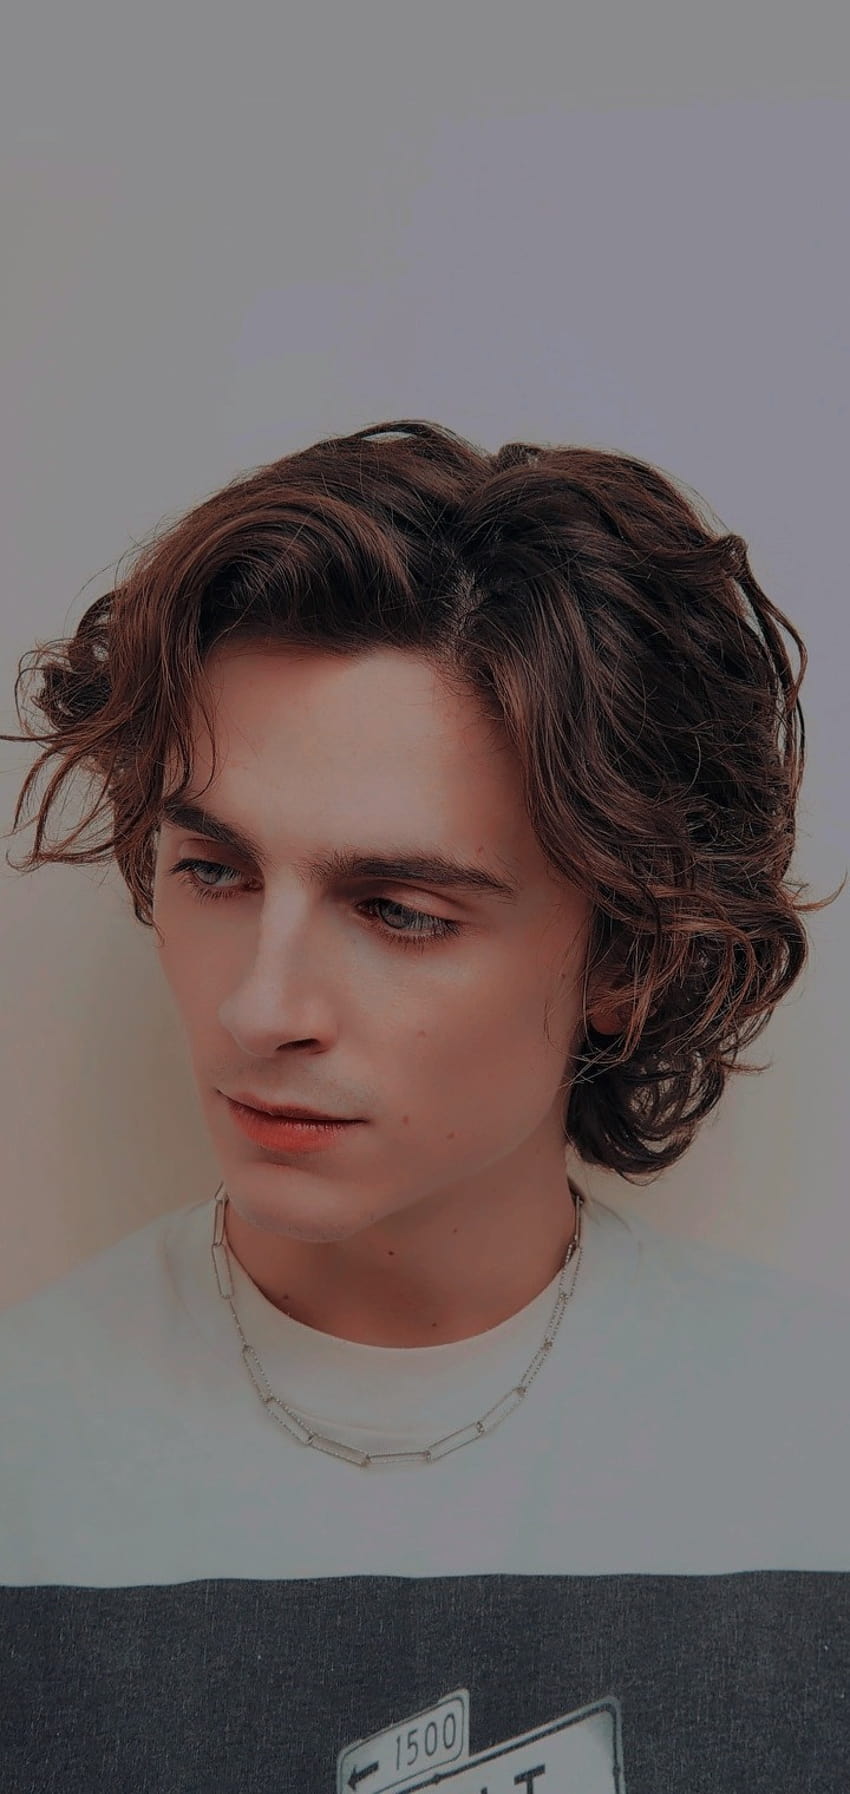 30 Timothée Chalamet HD Wallpapers and Backgrounds